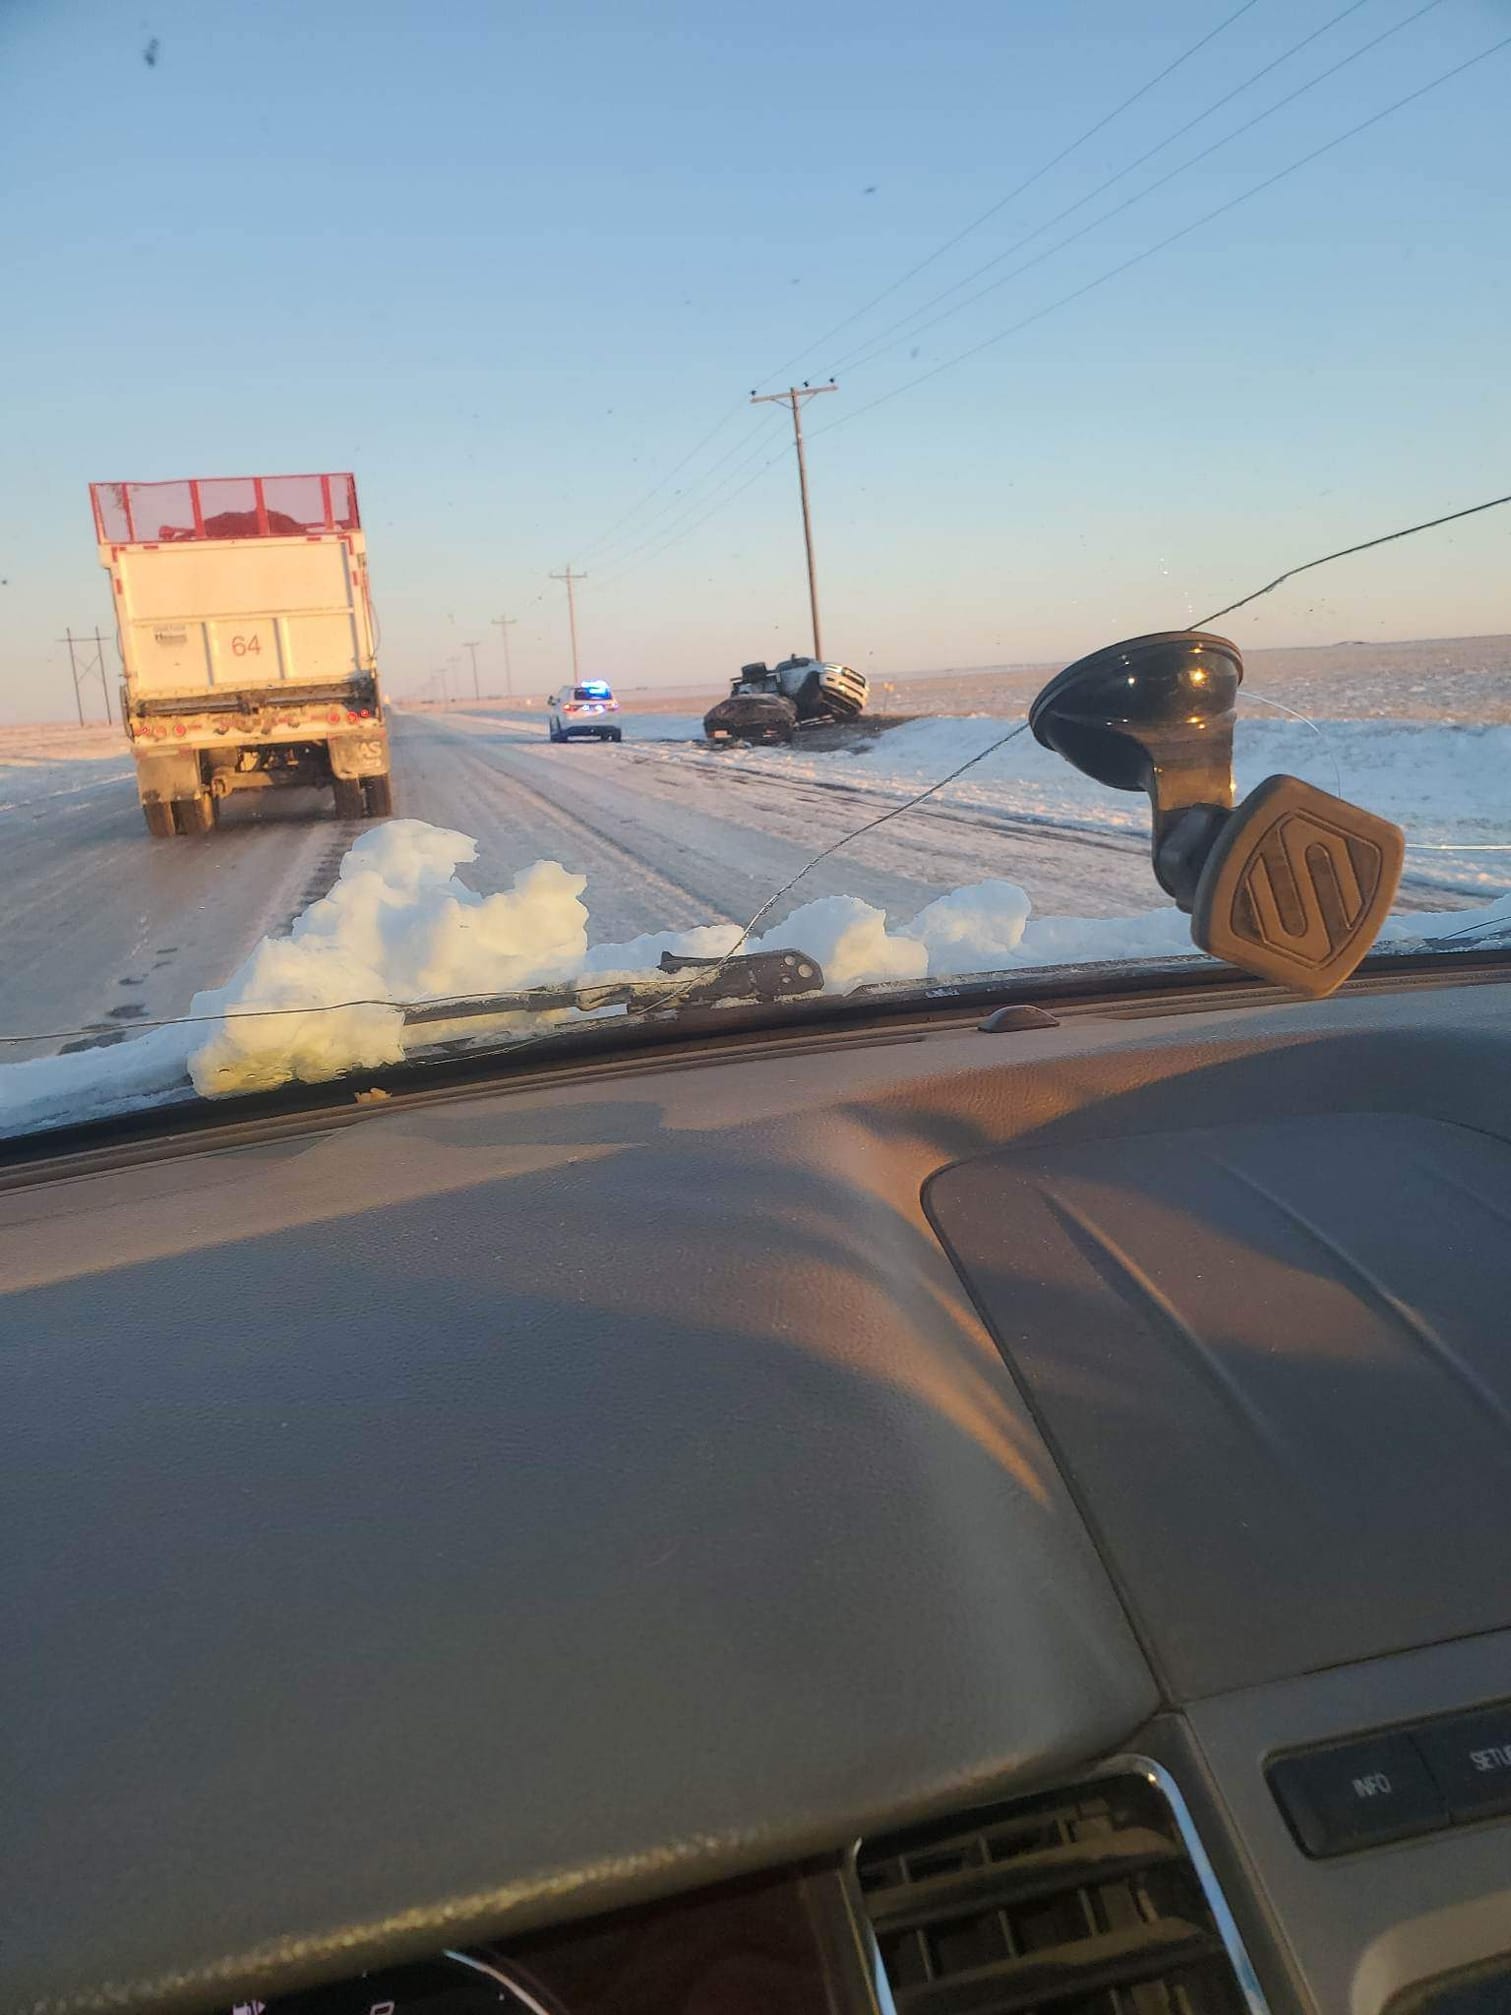 Photo by Destinie Jones of a snow-covered road and a truck that lost control near Hartley, Texas on February 15th, 2023